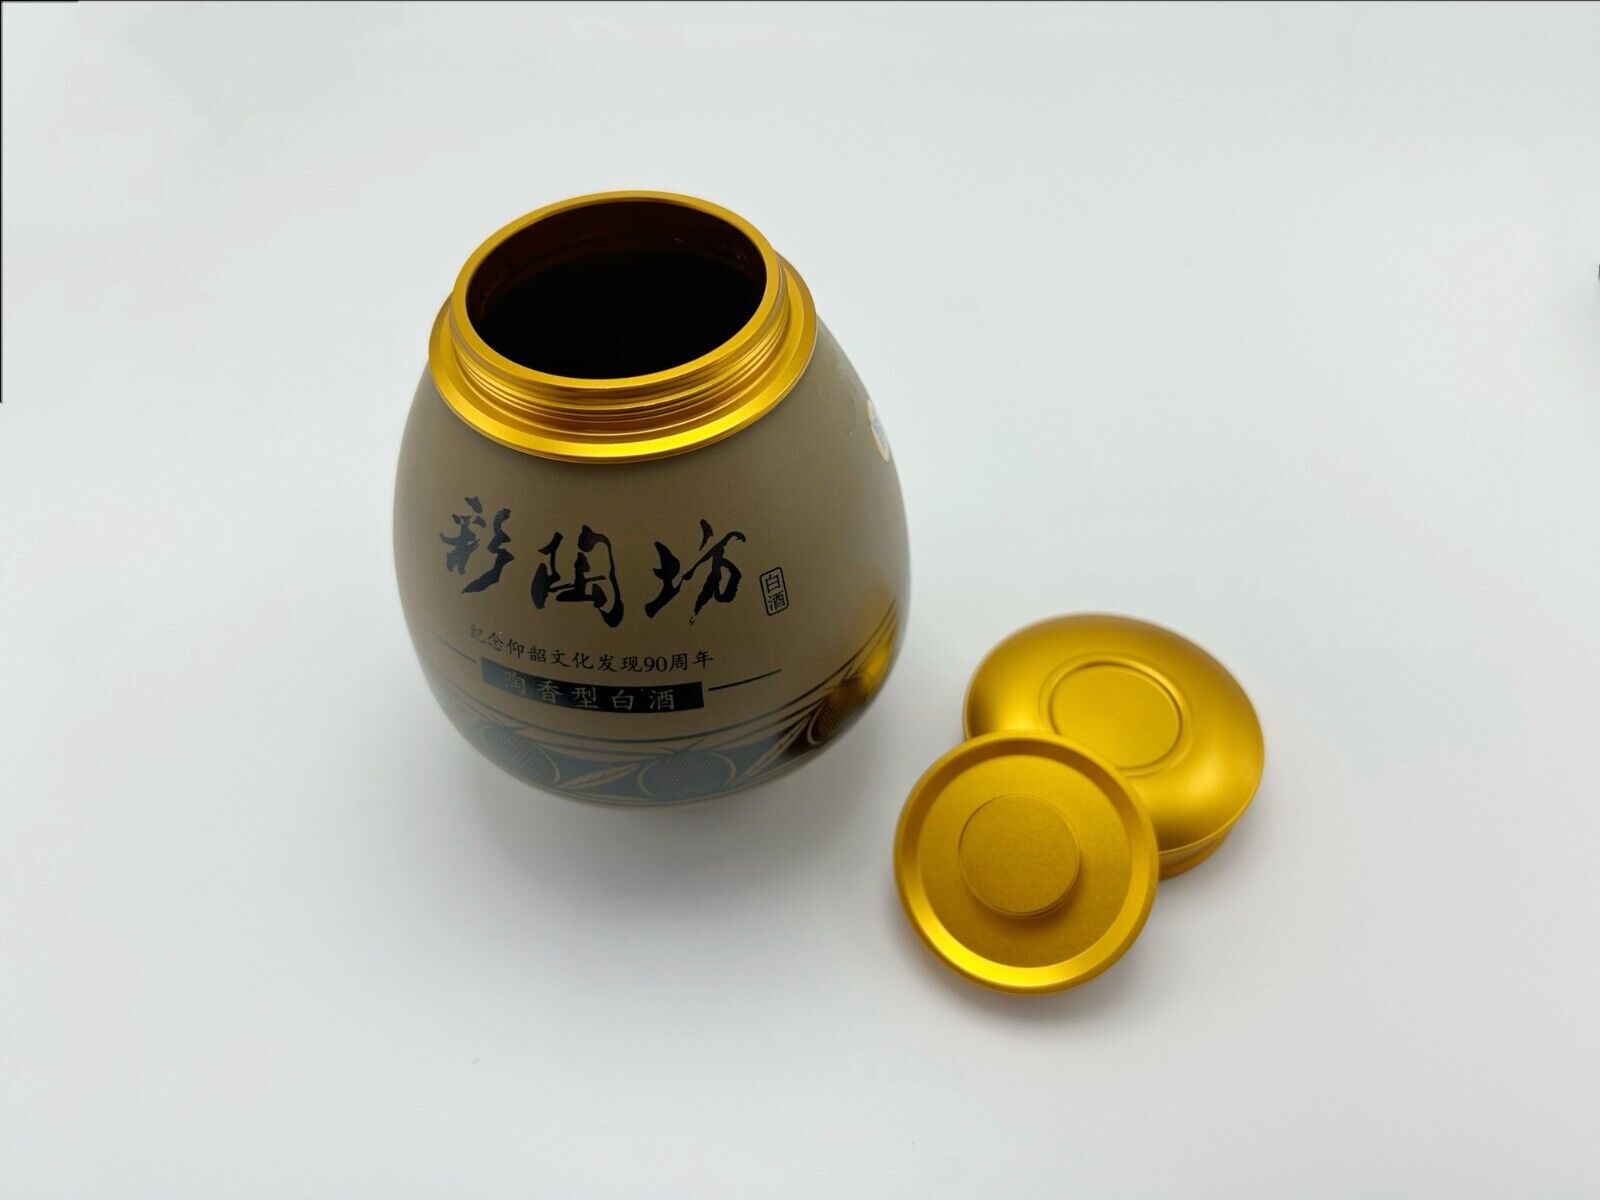 Handmade storage jars for the collection of Chinese colored pottery workshops